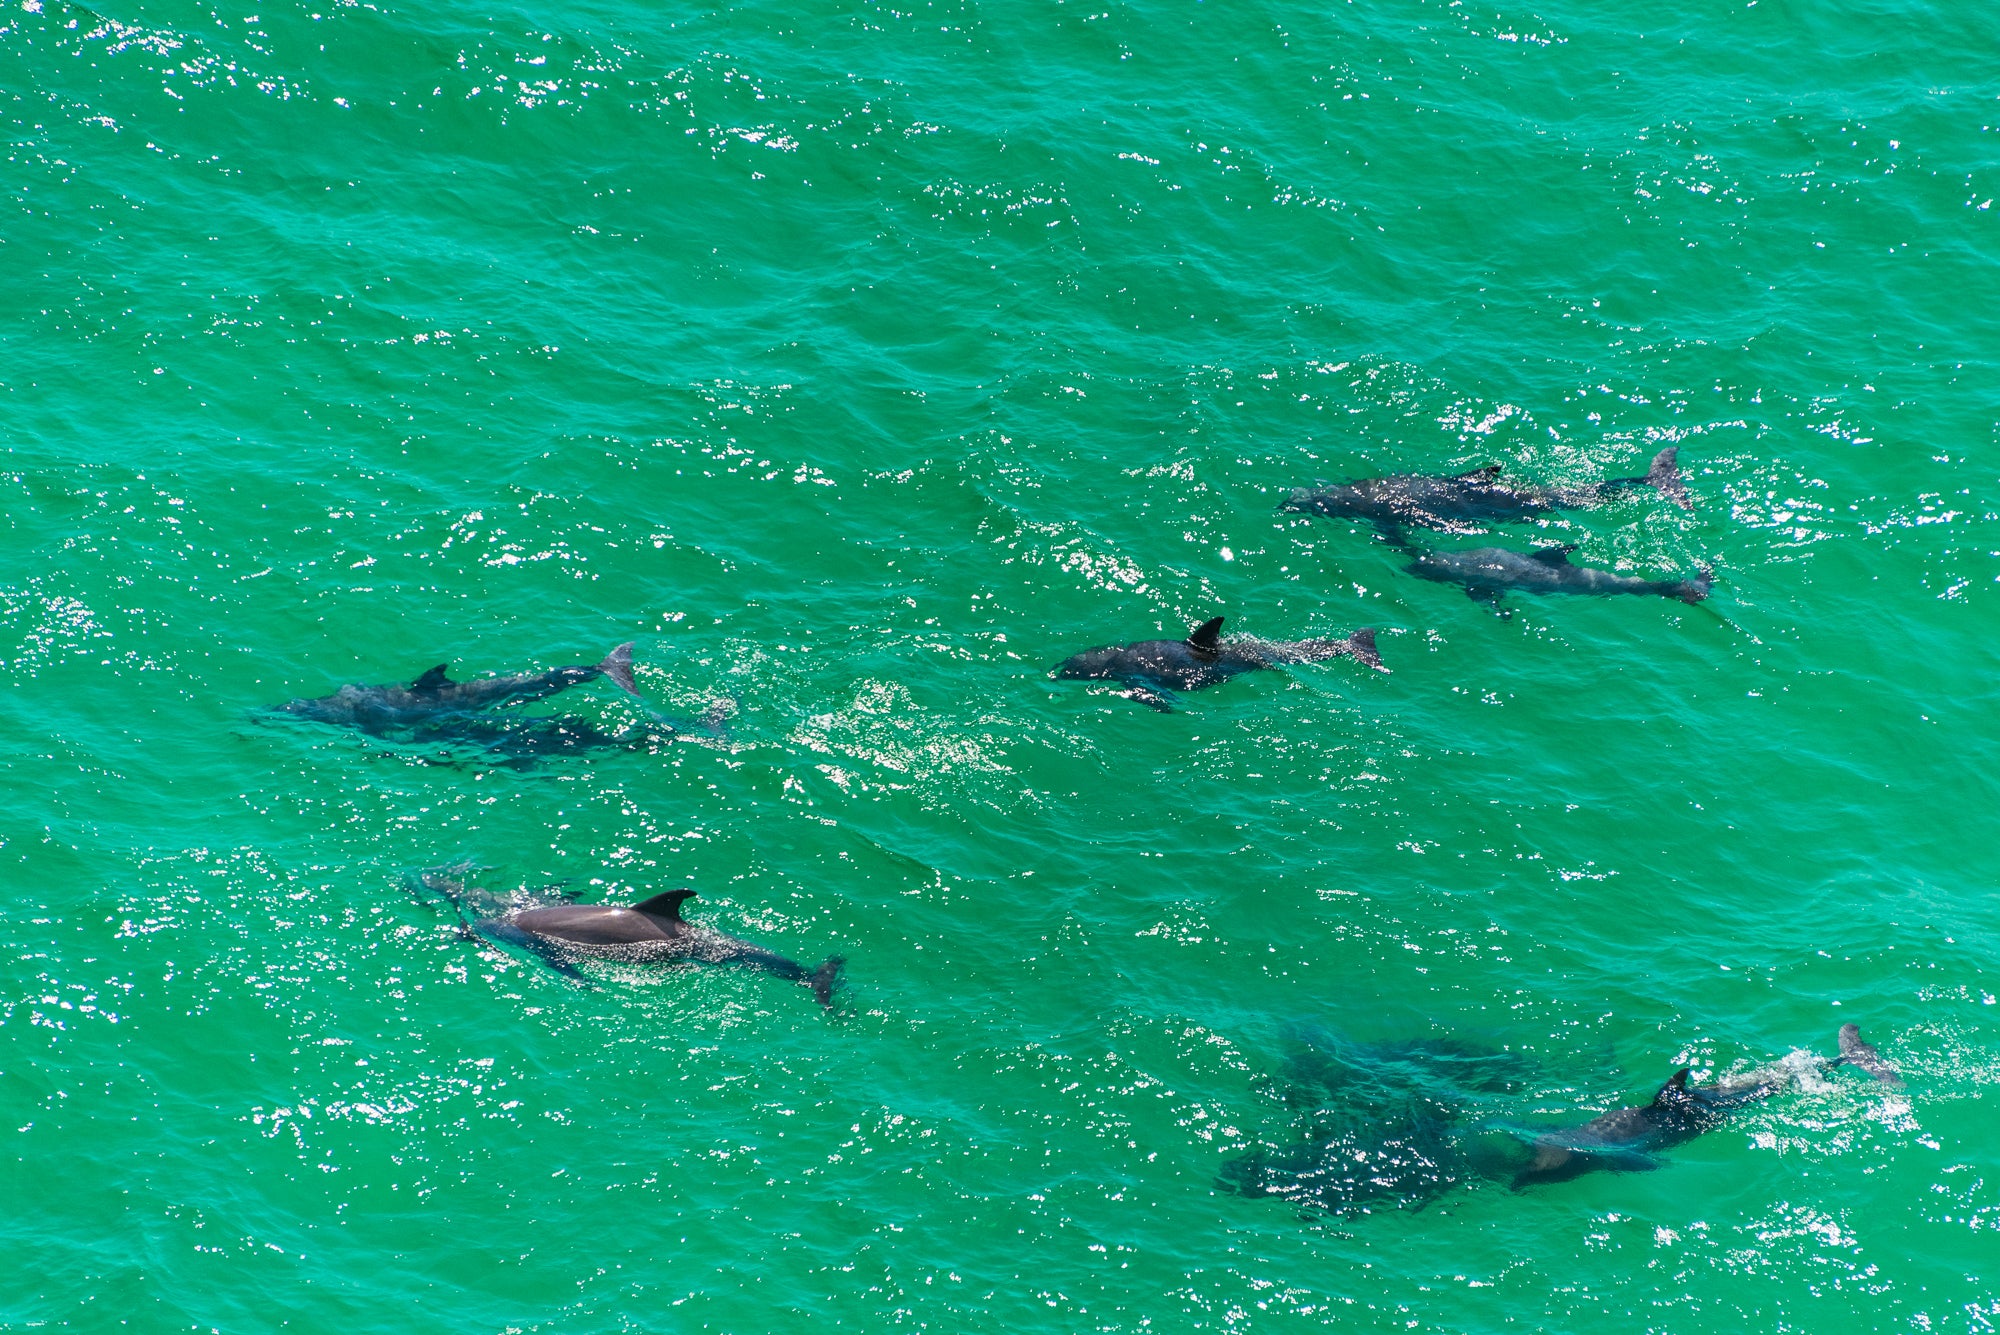 Dolphins at Play in our Emerald Waters